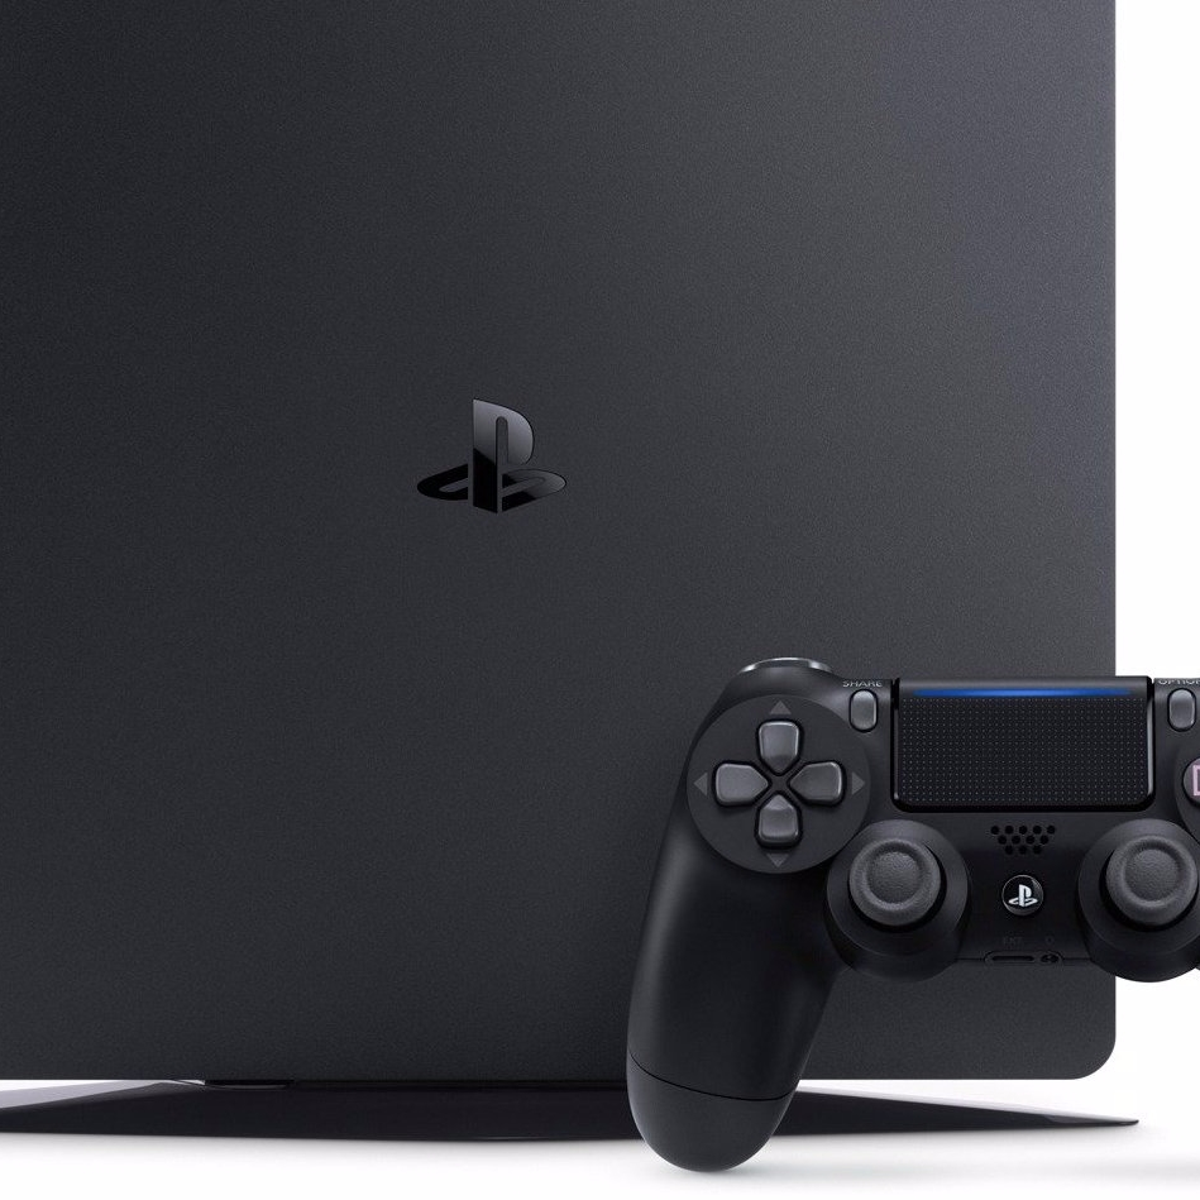 PS4 Slim release date, price, specs, new DualShock 4 and everything we know